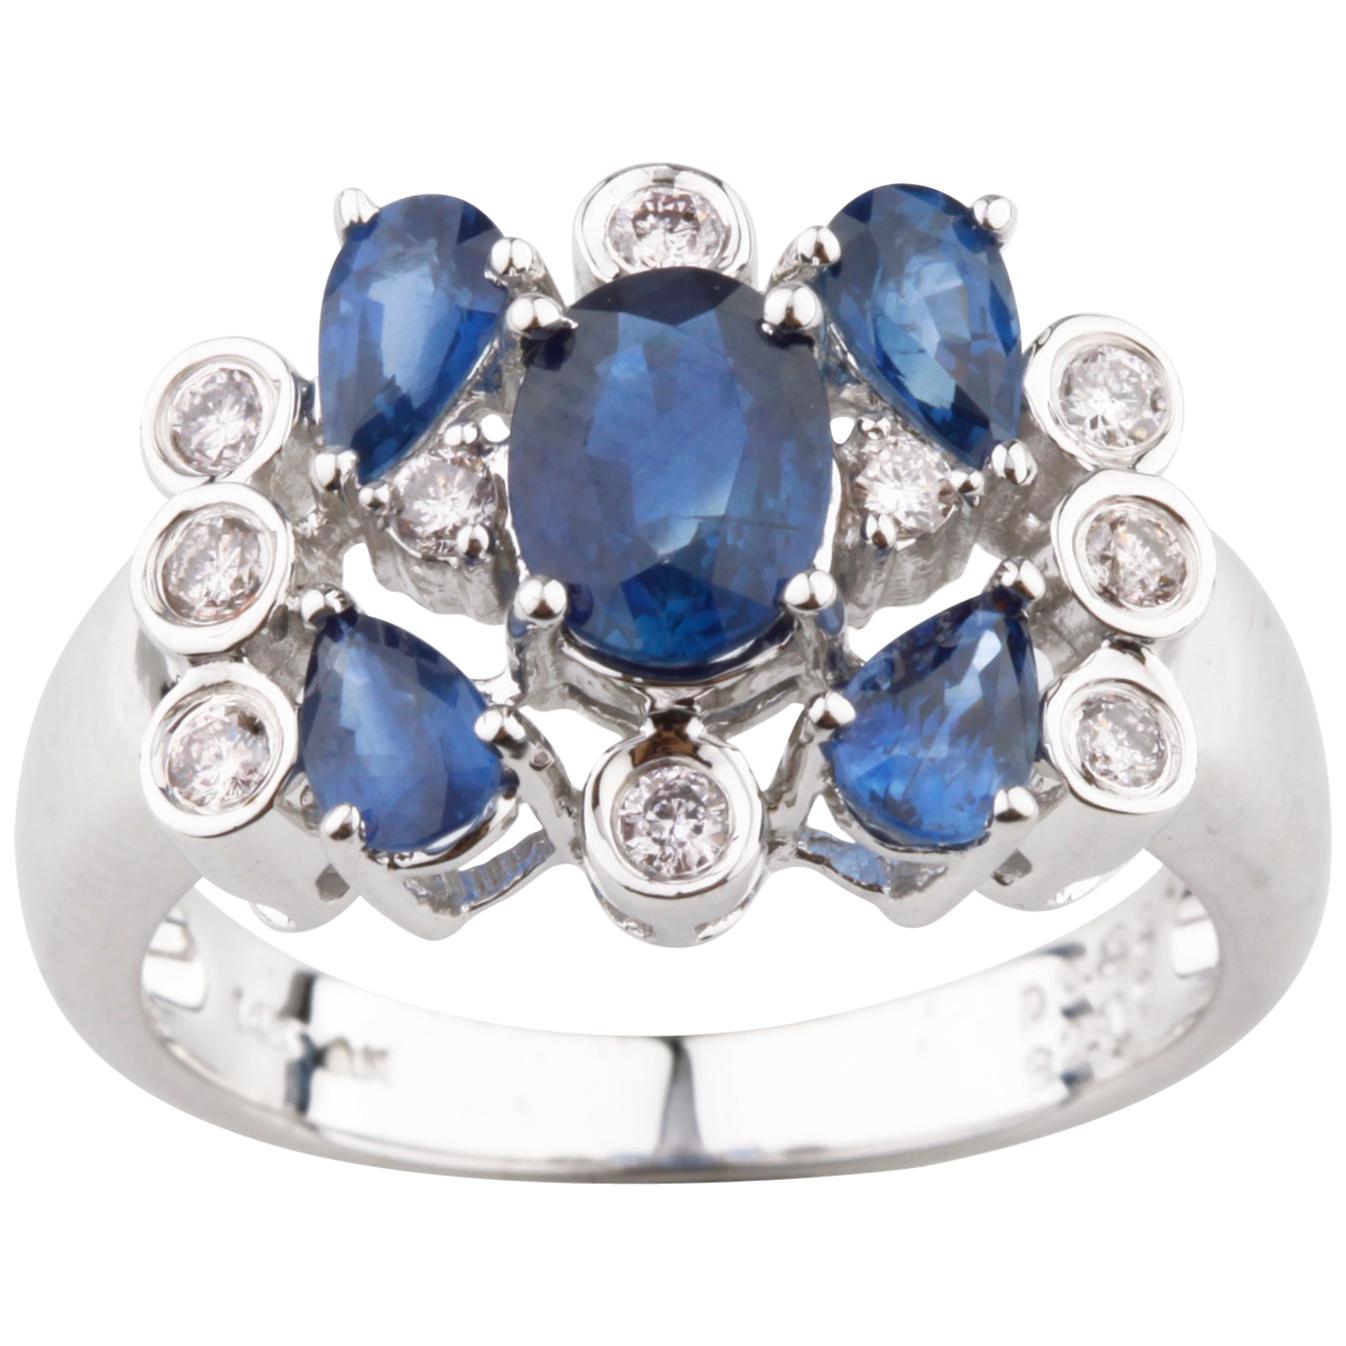 1.12 Carat Sapphire and Diamond Cluster Ring in White Gold